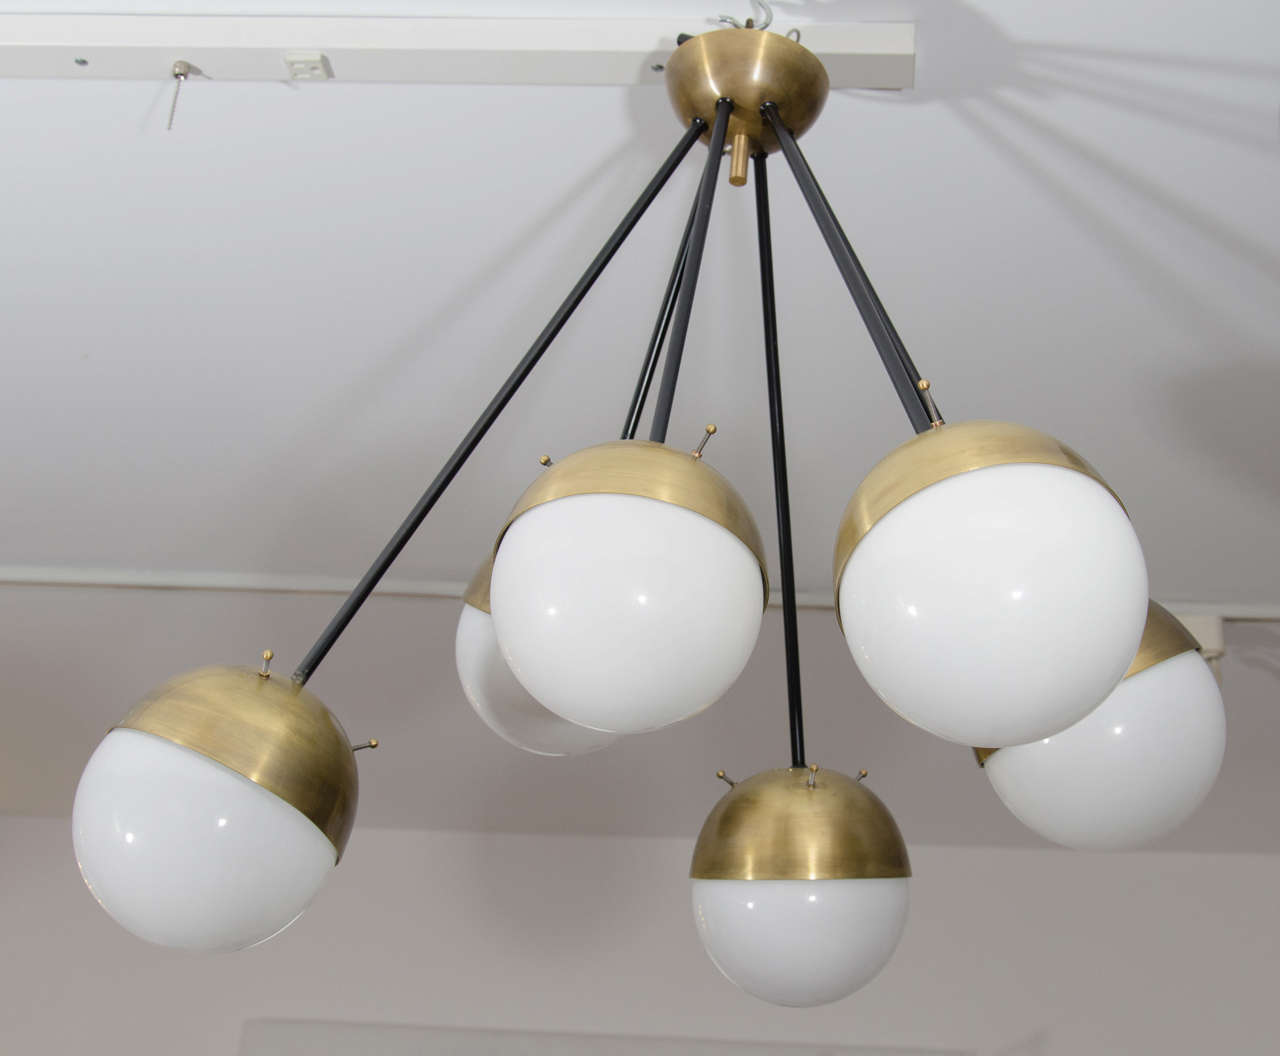 Multi length brass and glass chandelier by Stilnovo. Restored brass with black powder coated stem and original glass shades. The glass orbs are 7.5